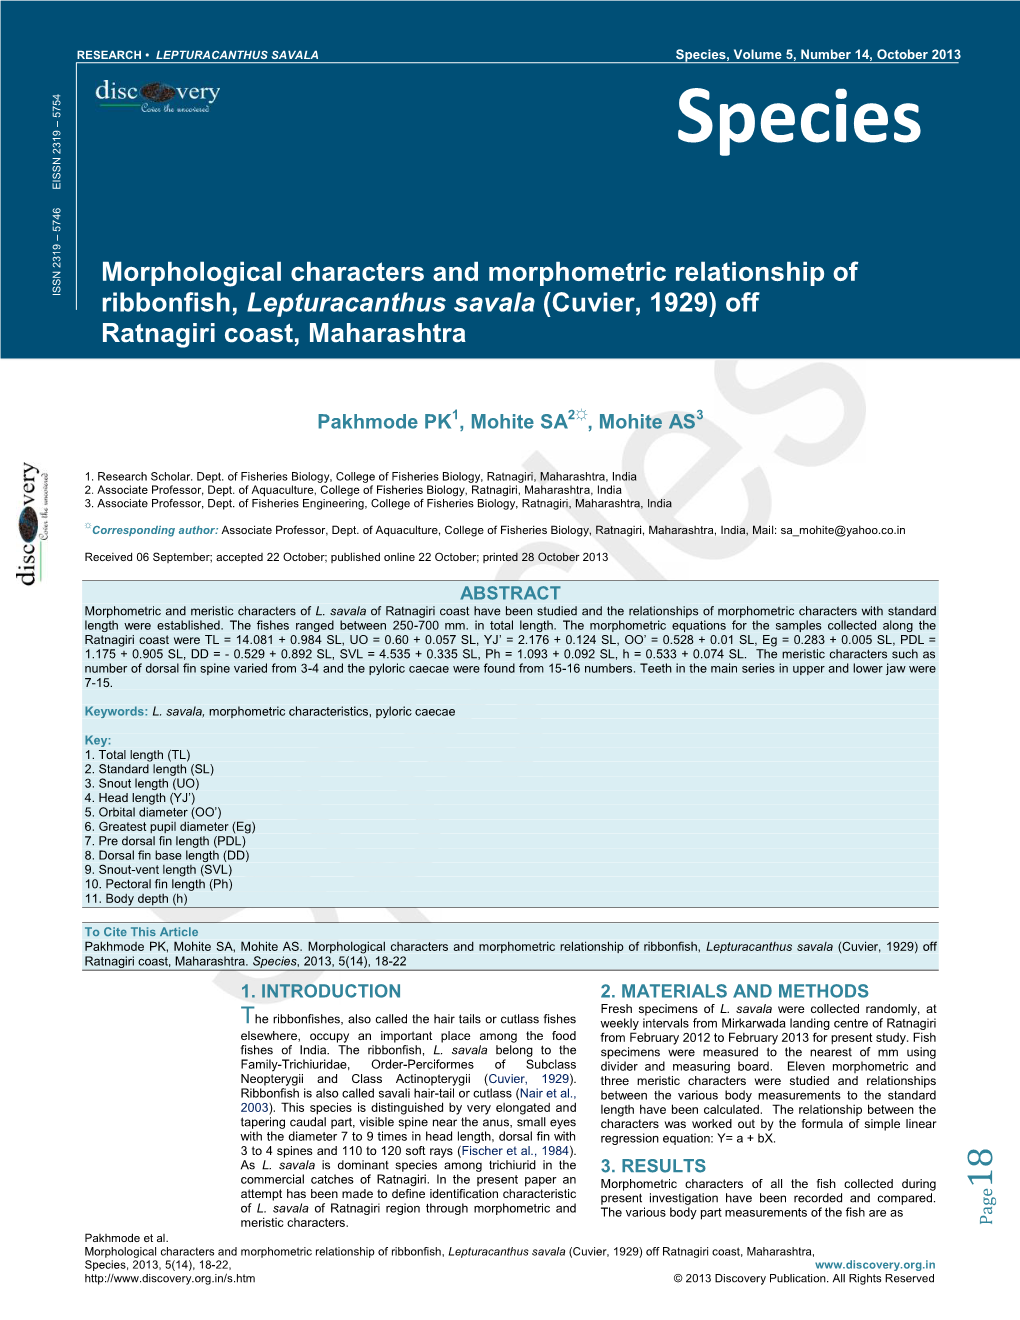 Species Morphological Characters and Morphometric Relationship Of